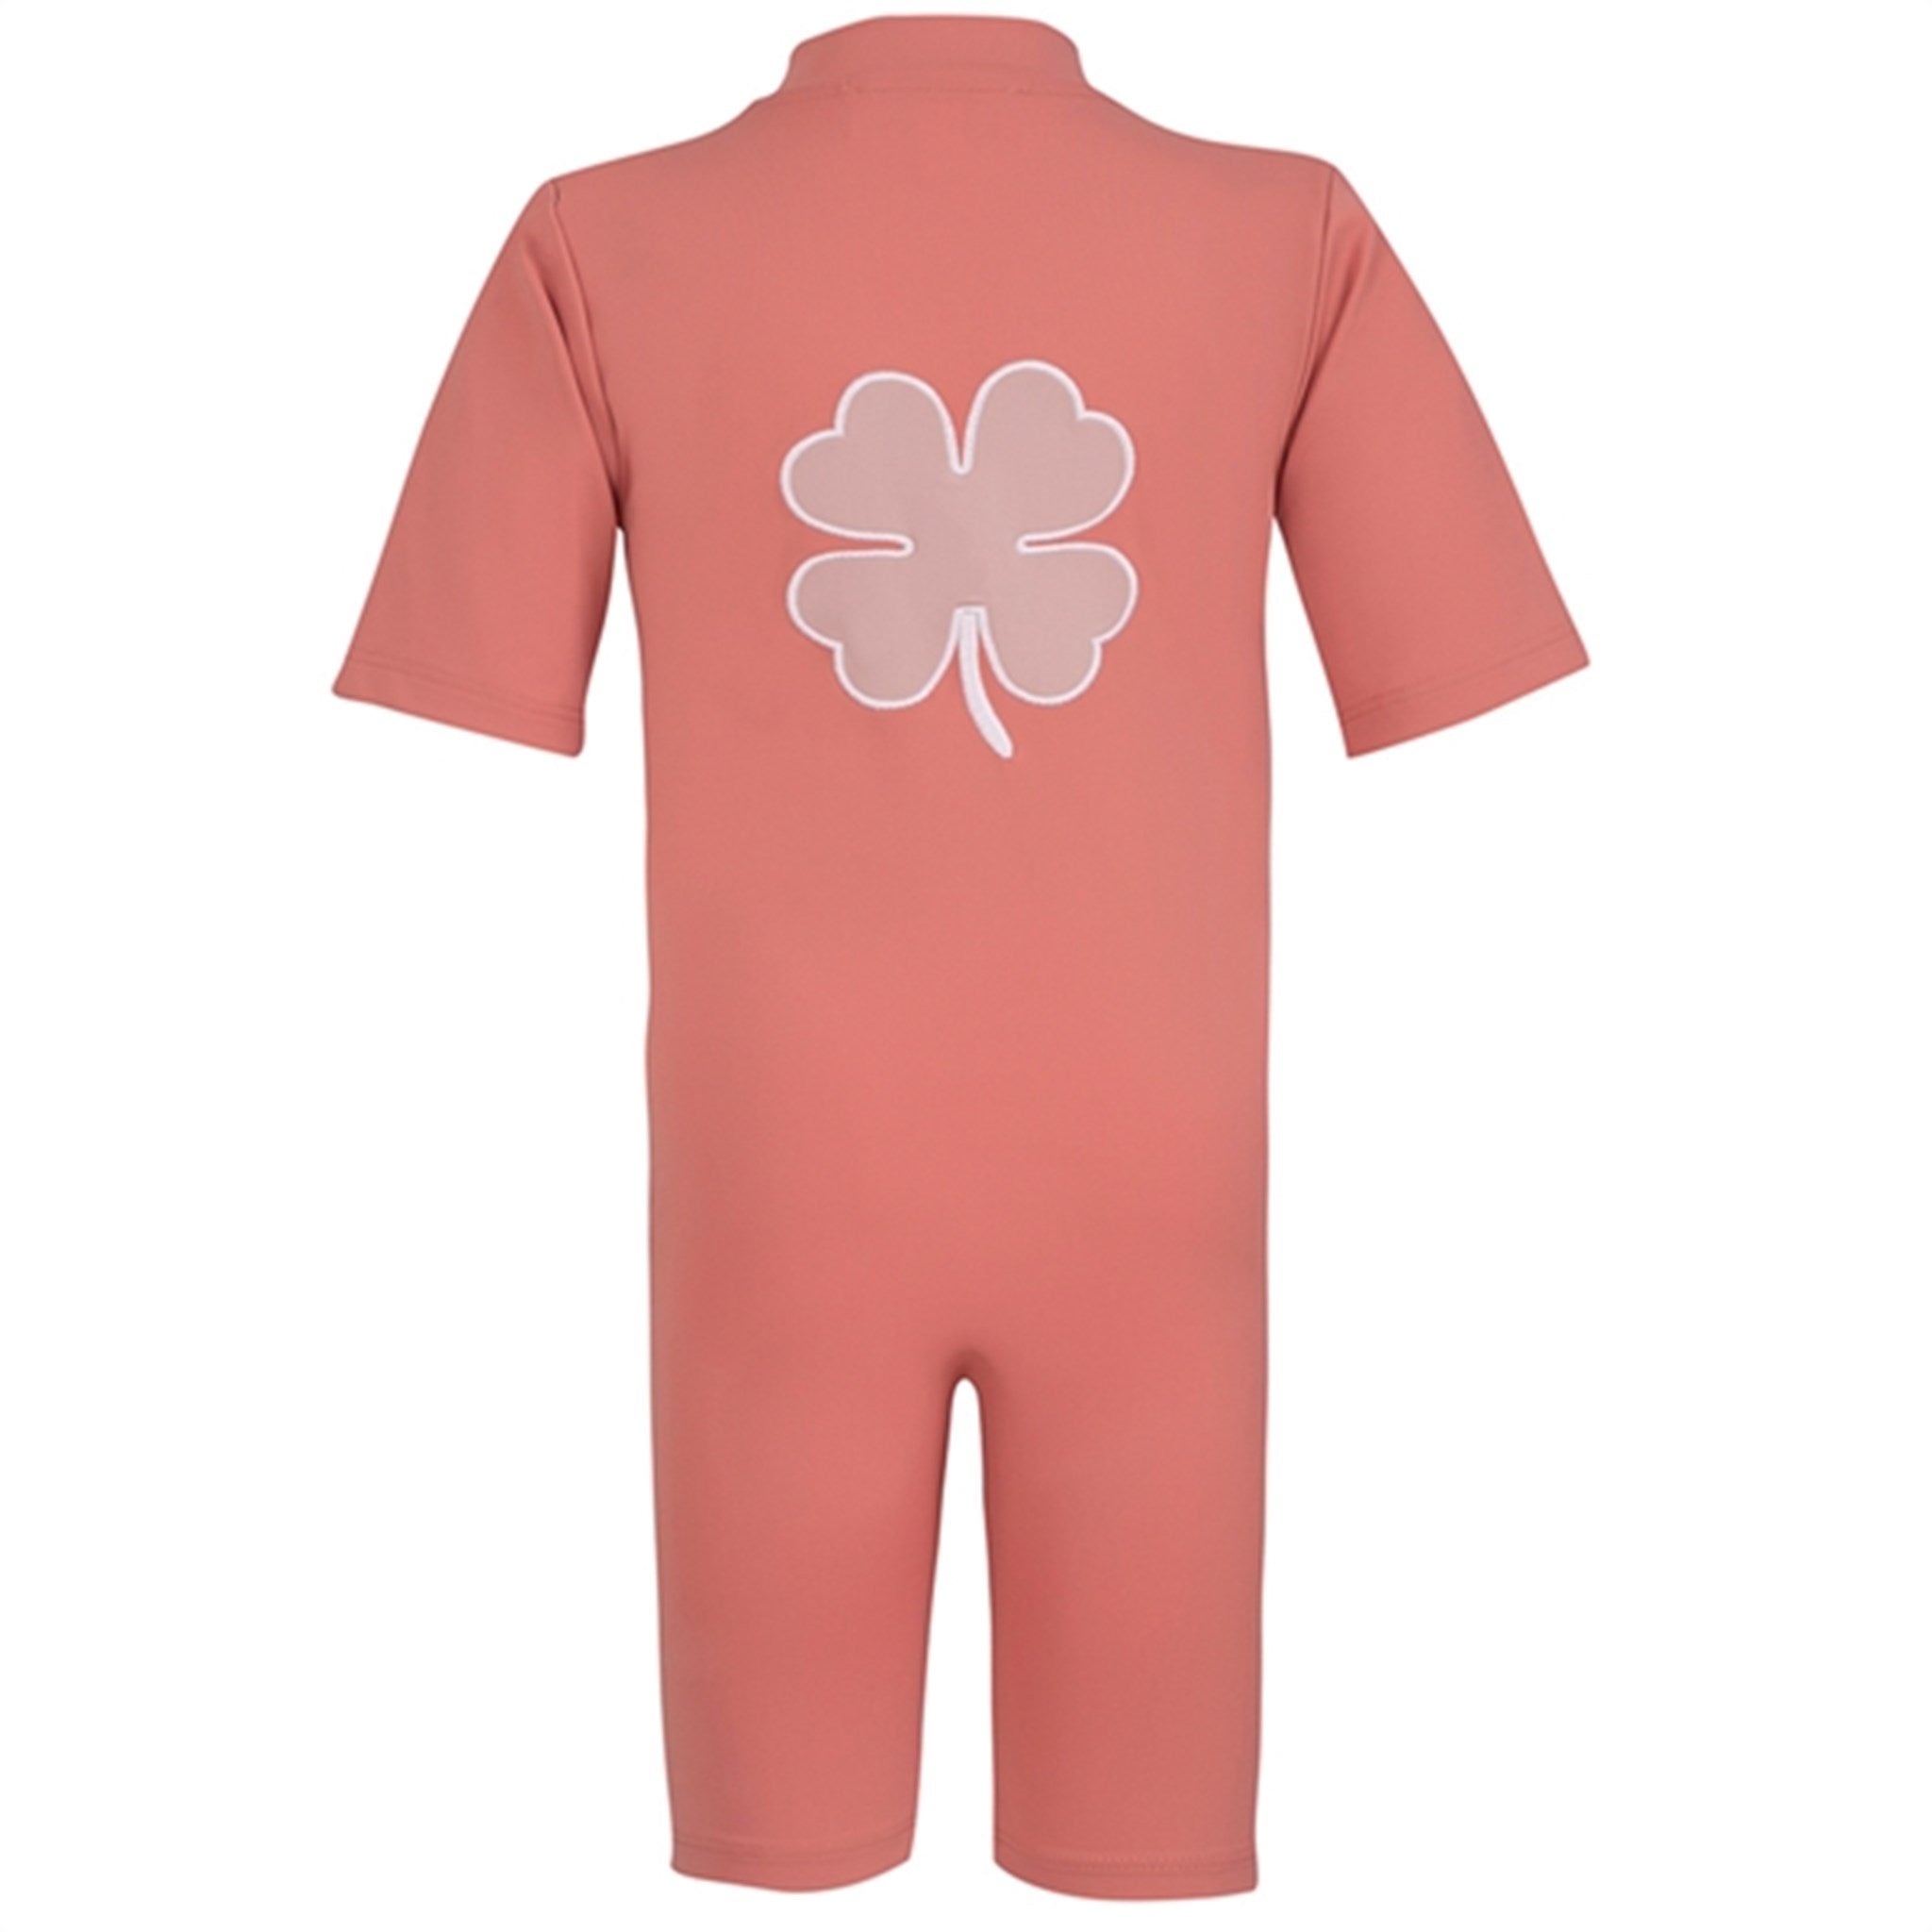 Petit Crabe Morocco Noe Clover Sunsuit with Zipper 5